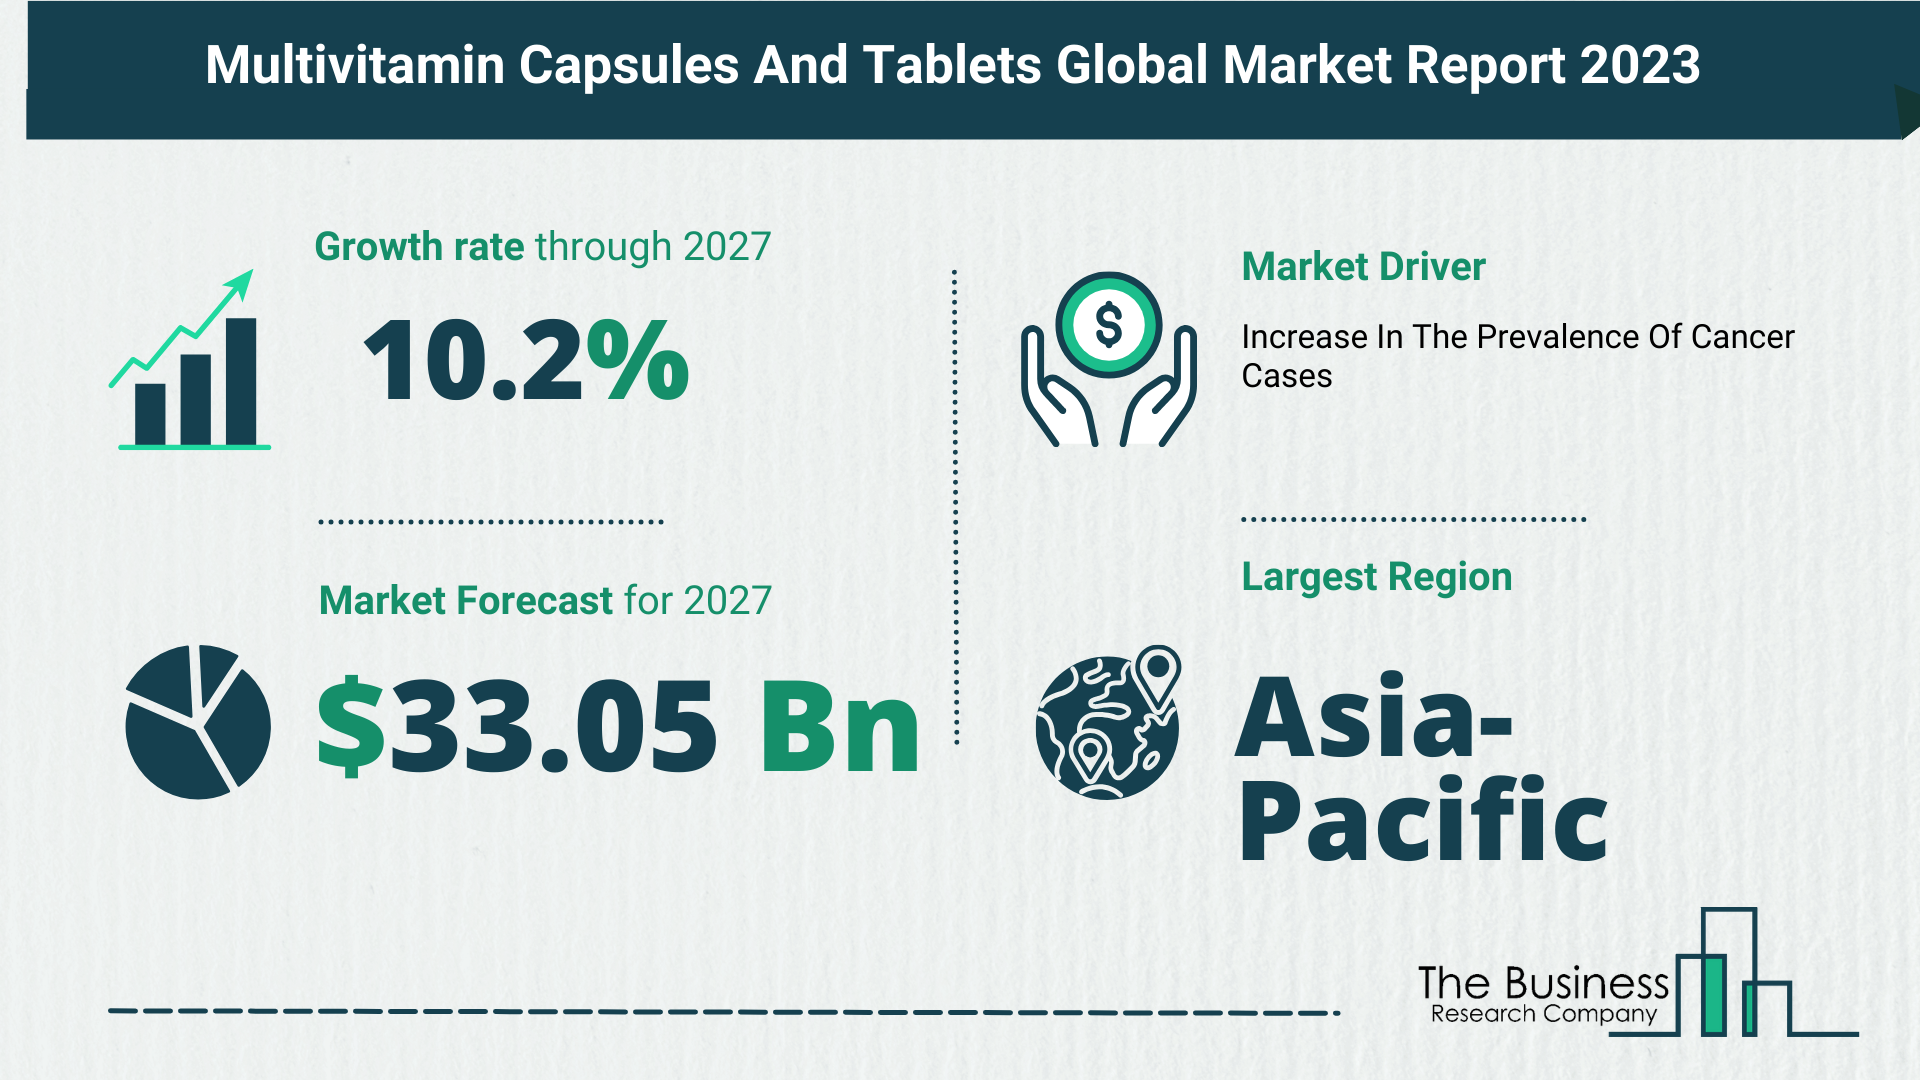 Multivitamin Capsules And Tablets Market Forecast 2023: Forecast Market Size, Drivers And Key Segments